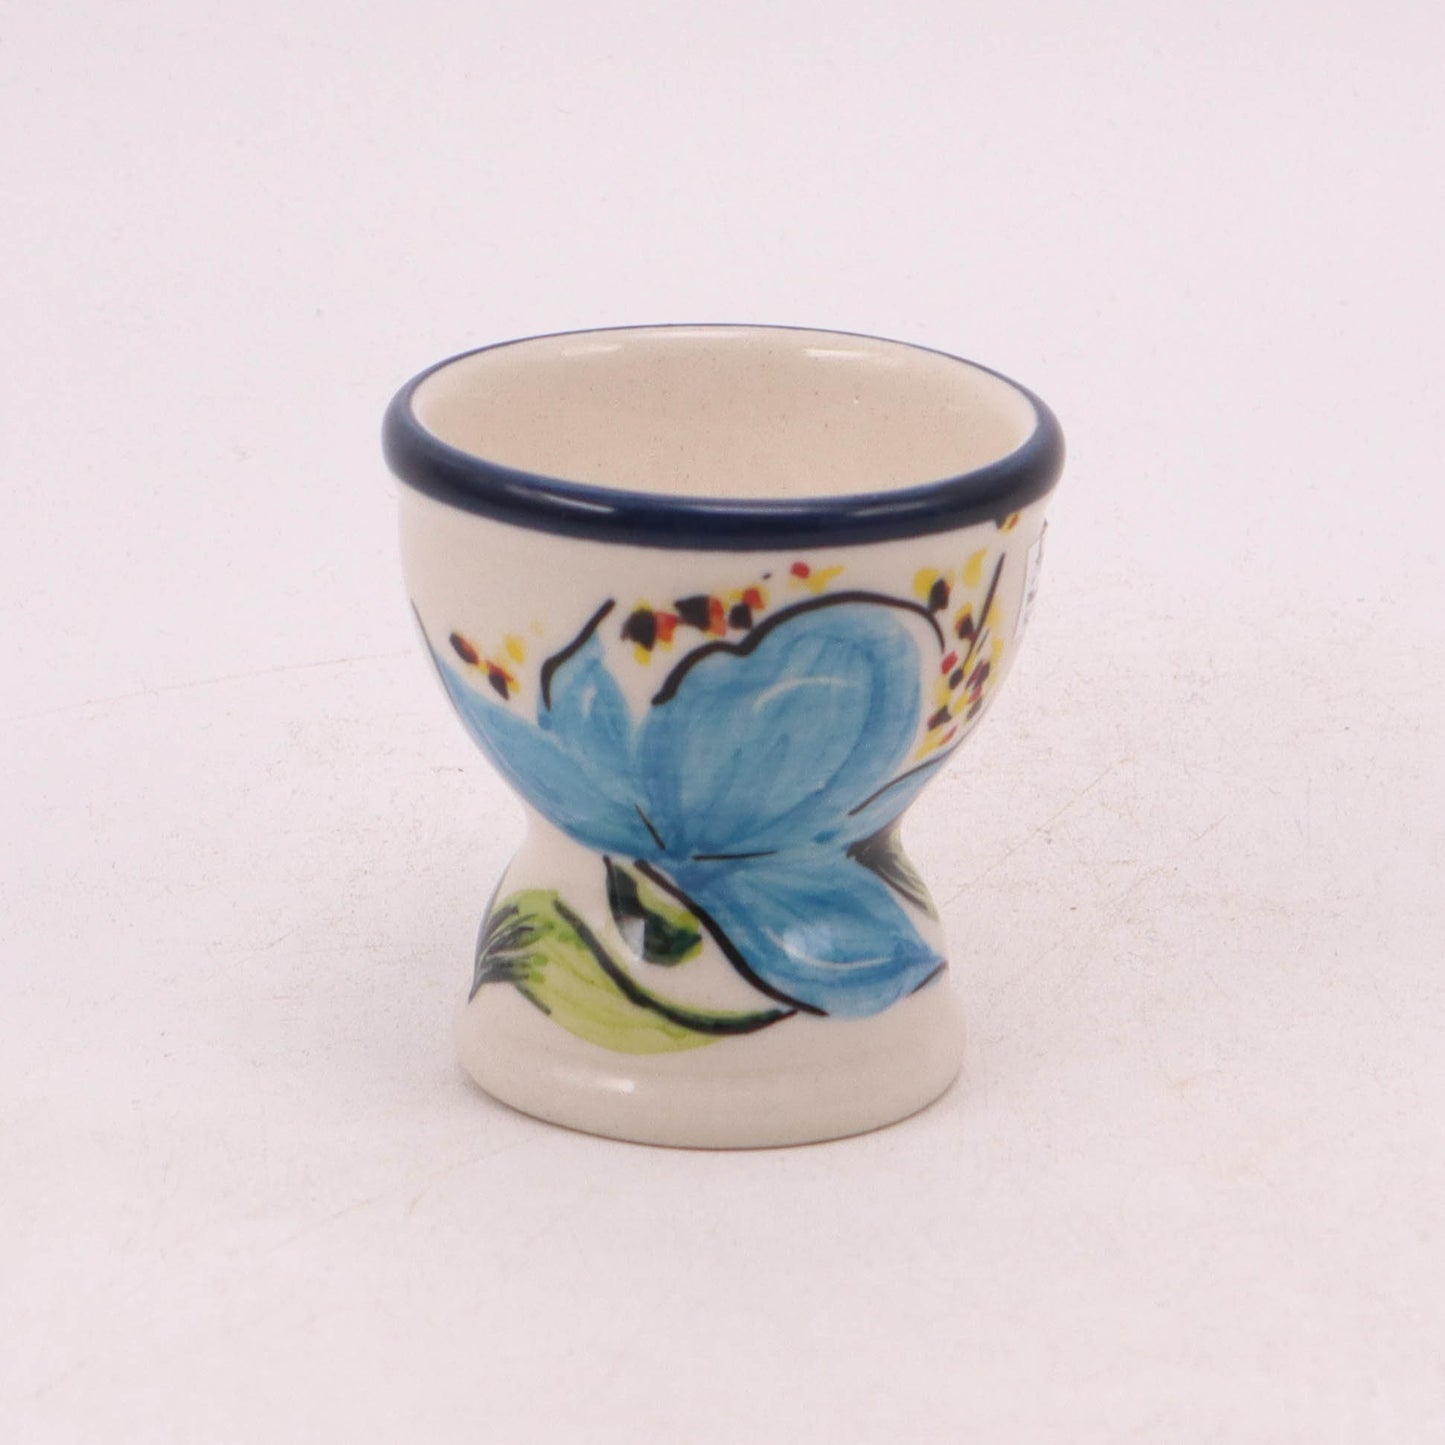 2"x2" Egg Cup. Pattern: Blue Lily